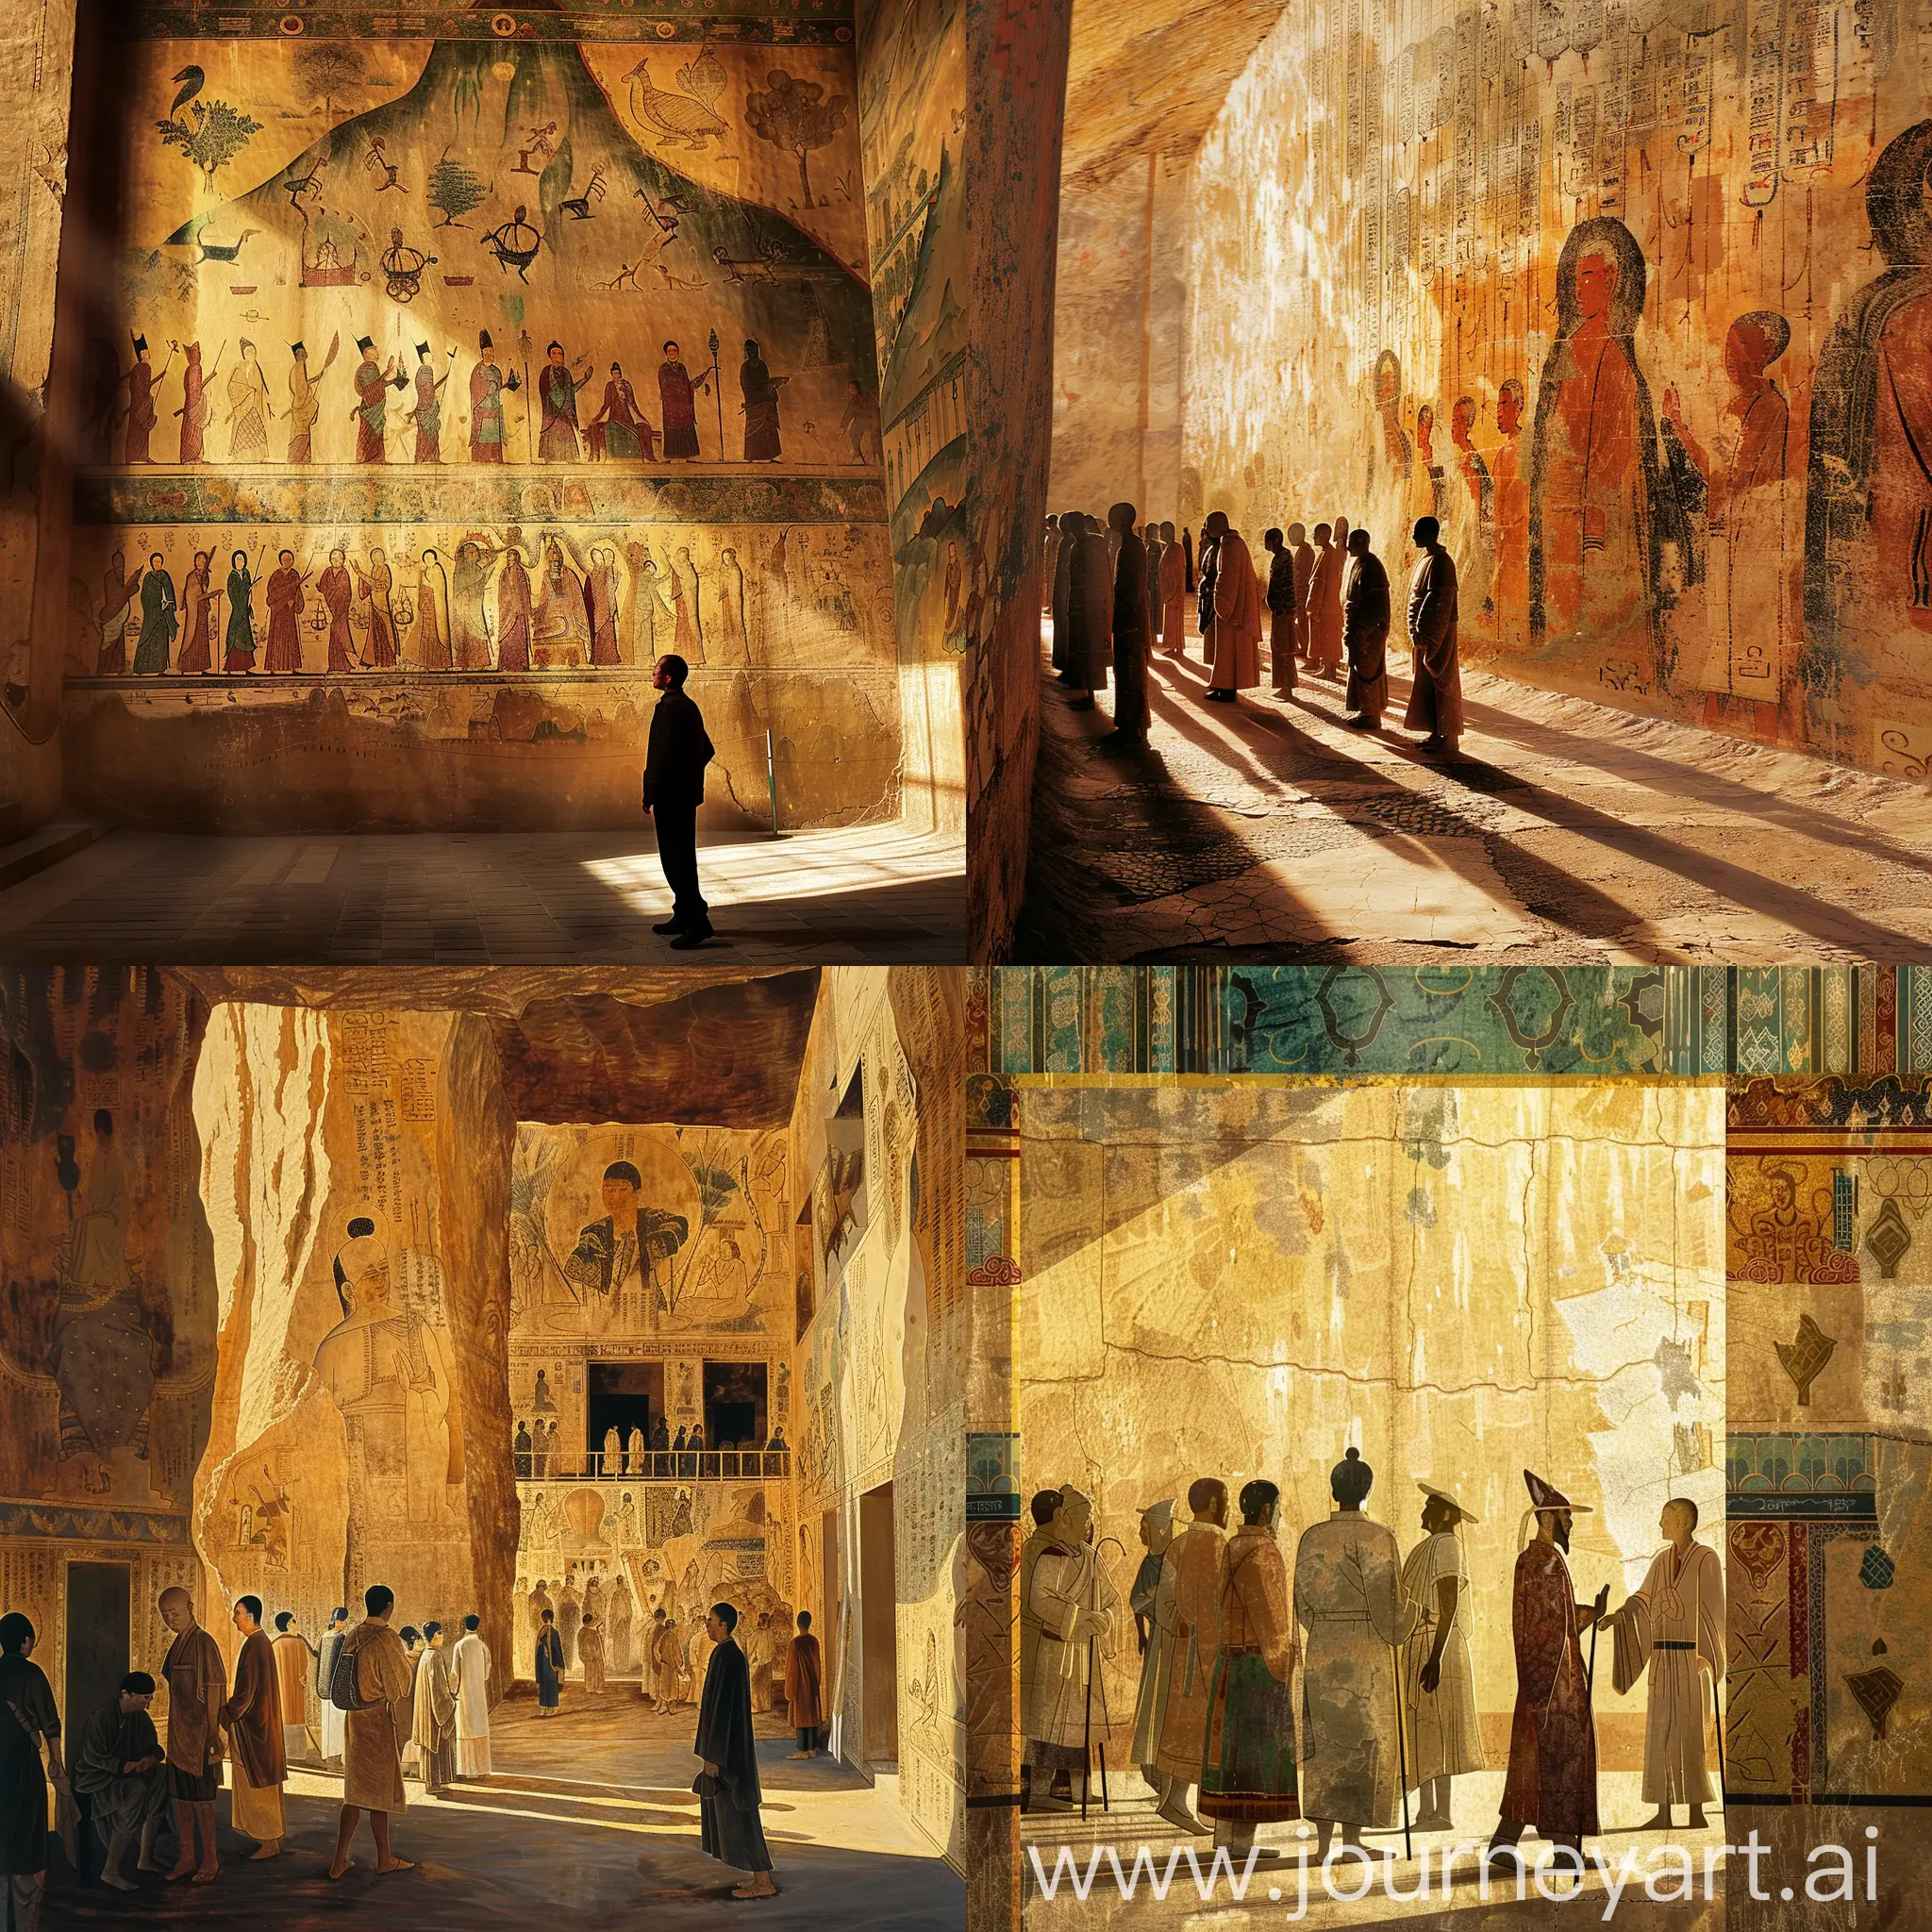 Dunhuang Mogao Grottoes ，Buddhist stories ，Historical legends ，Daily life scenes ，Golden light and shadows ，Decorative lines ，Mural details ，ncient costumes ，Ink rendering ， Cultural heritage